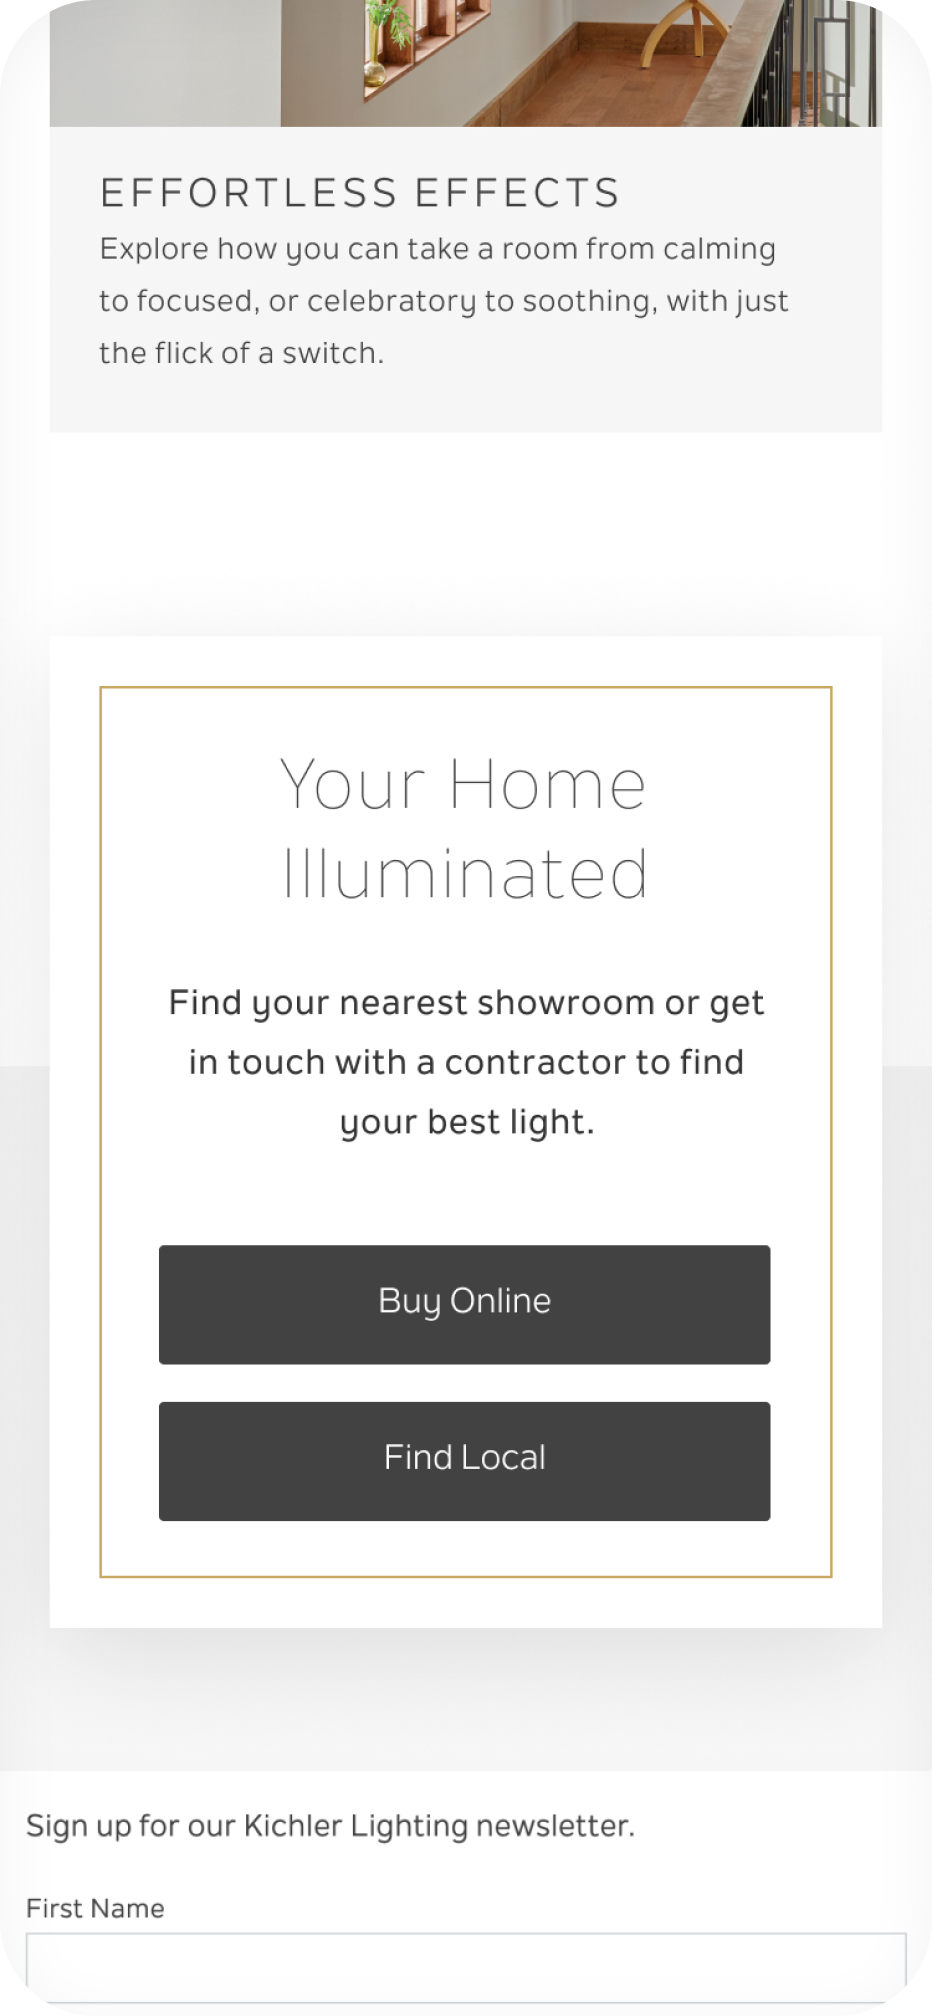 homepage buttons for buying products online or in-person and a newsletter signup